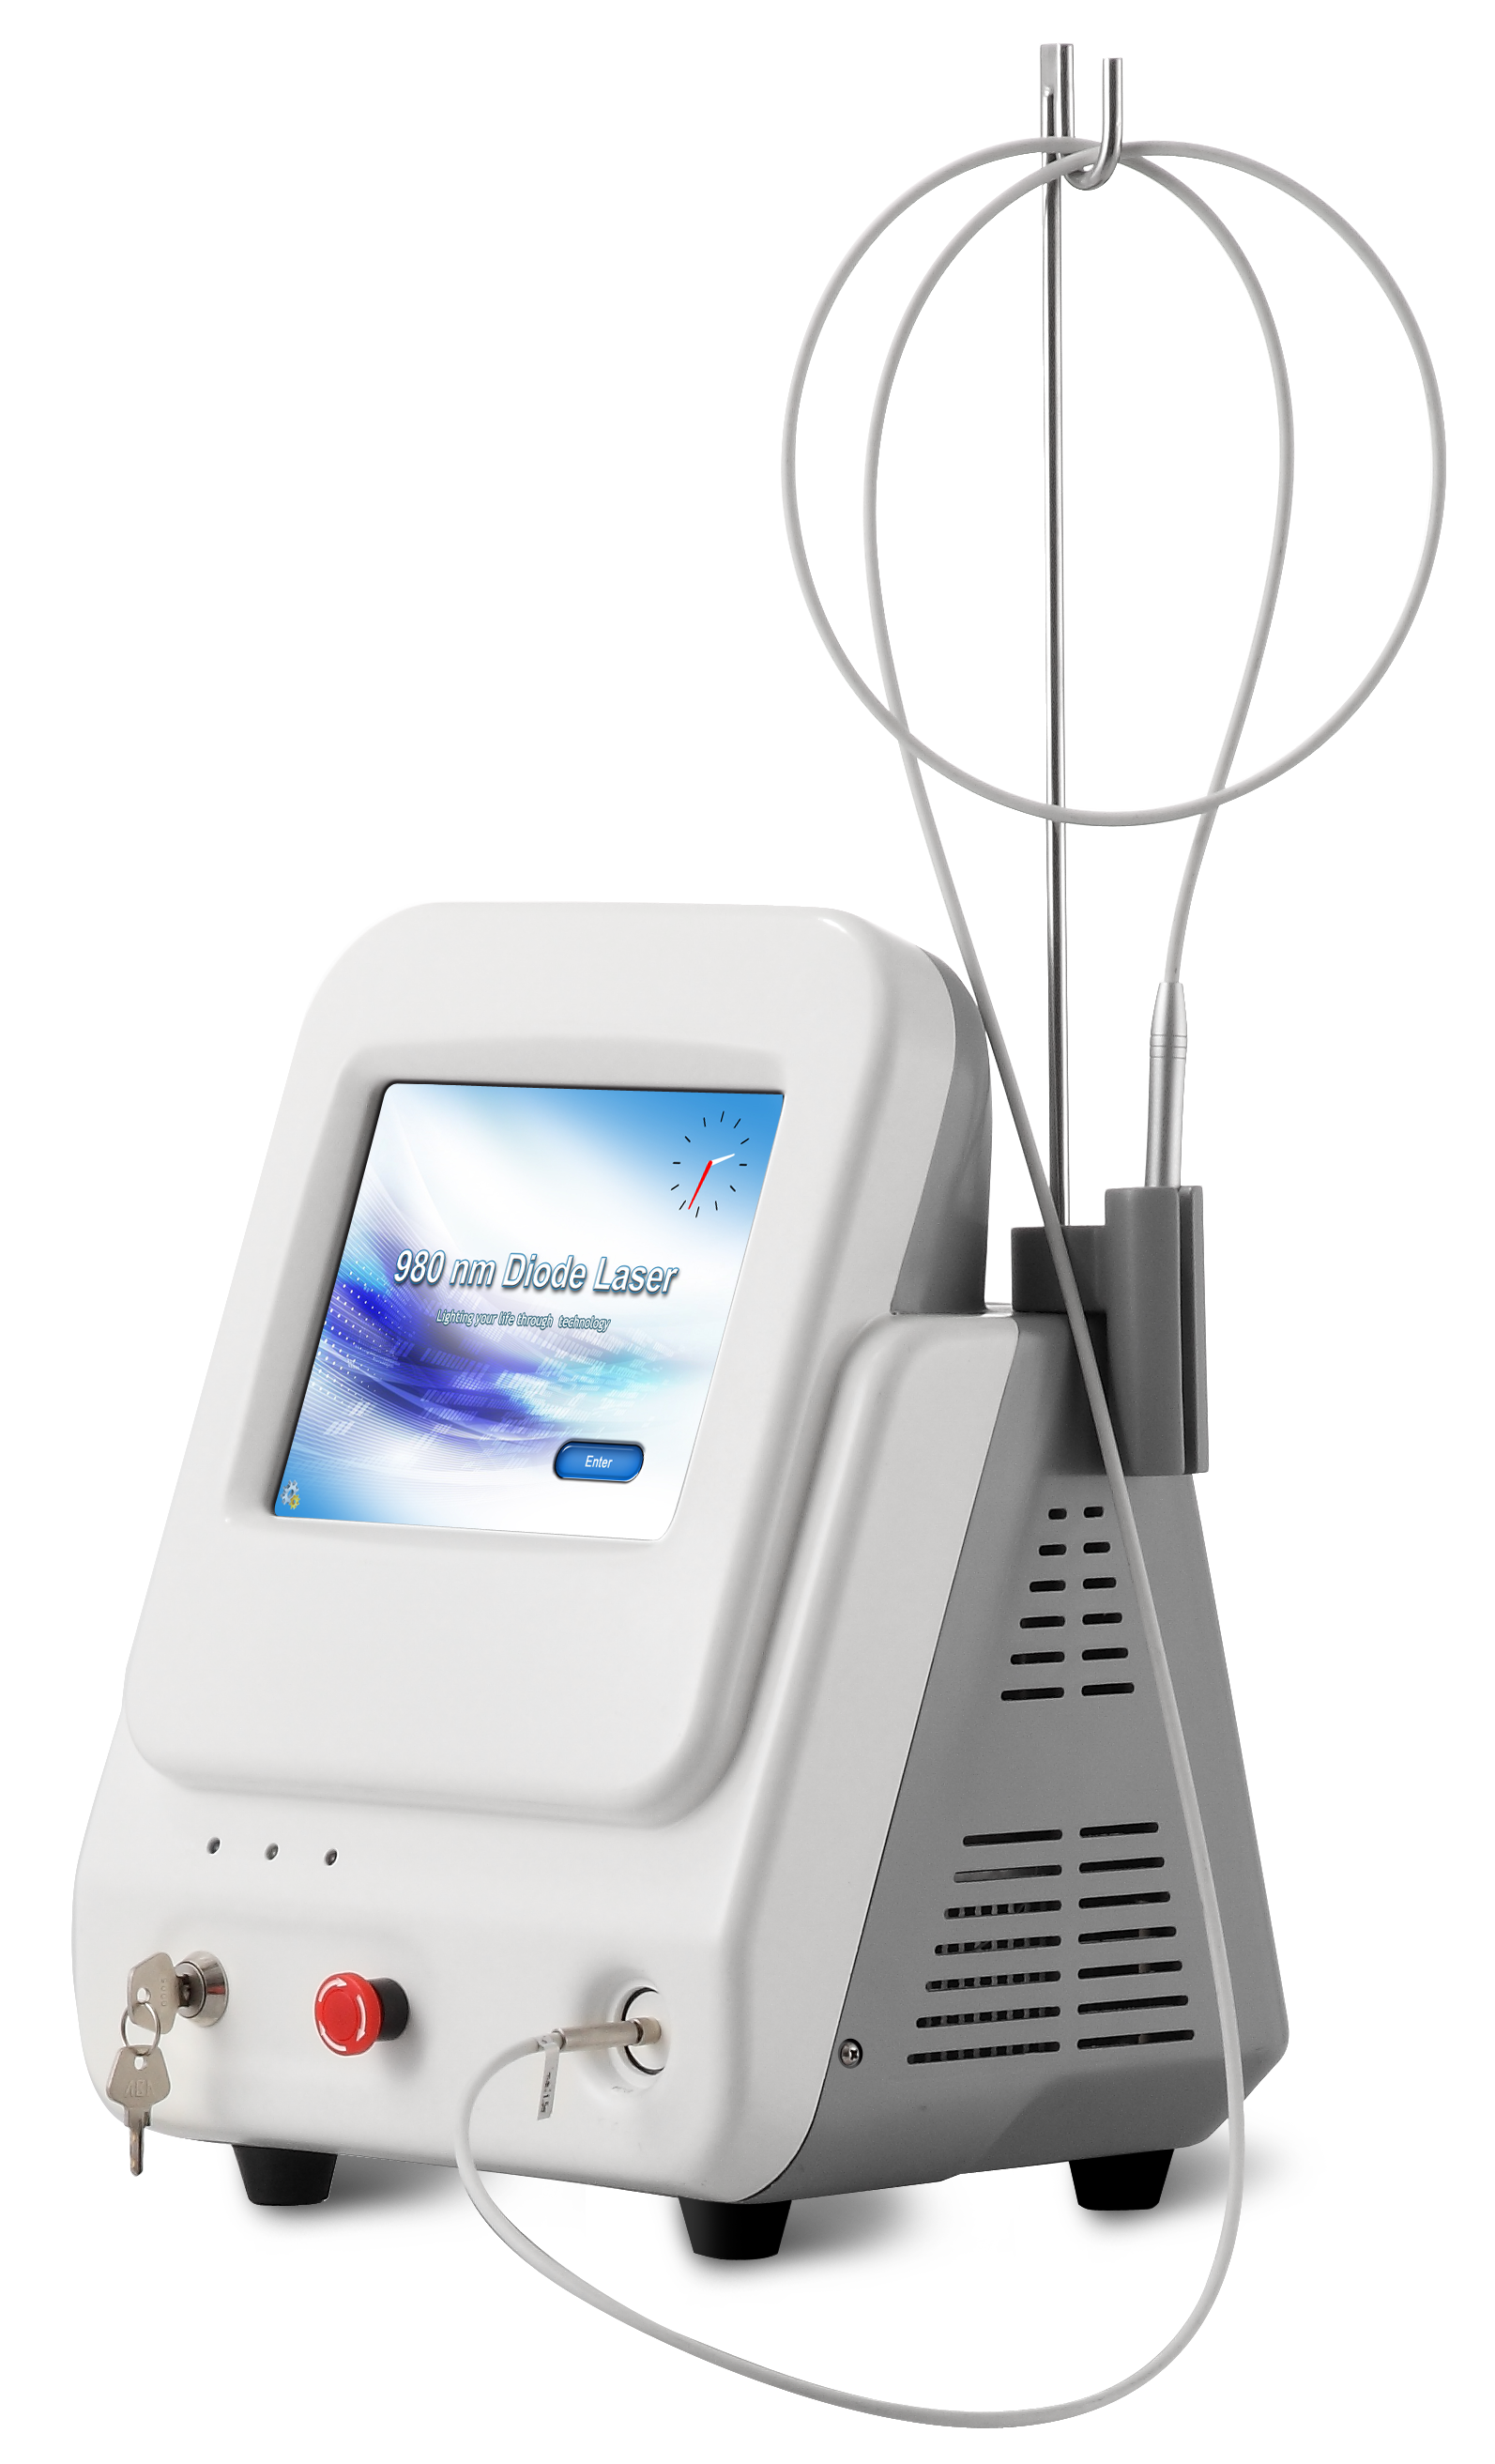 TUV CE medical and USA FDA approved 980nm diode laser